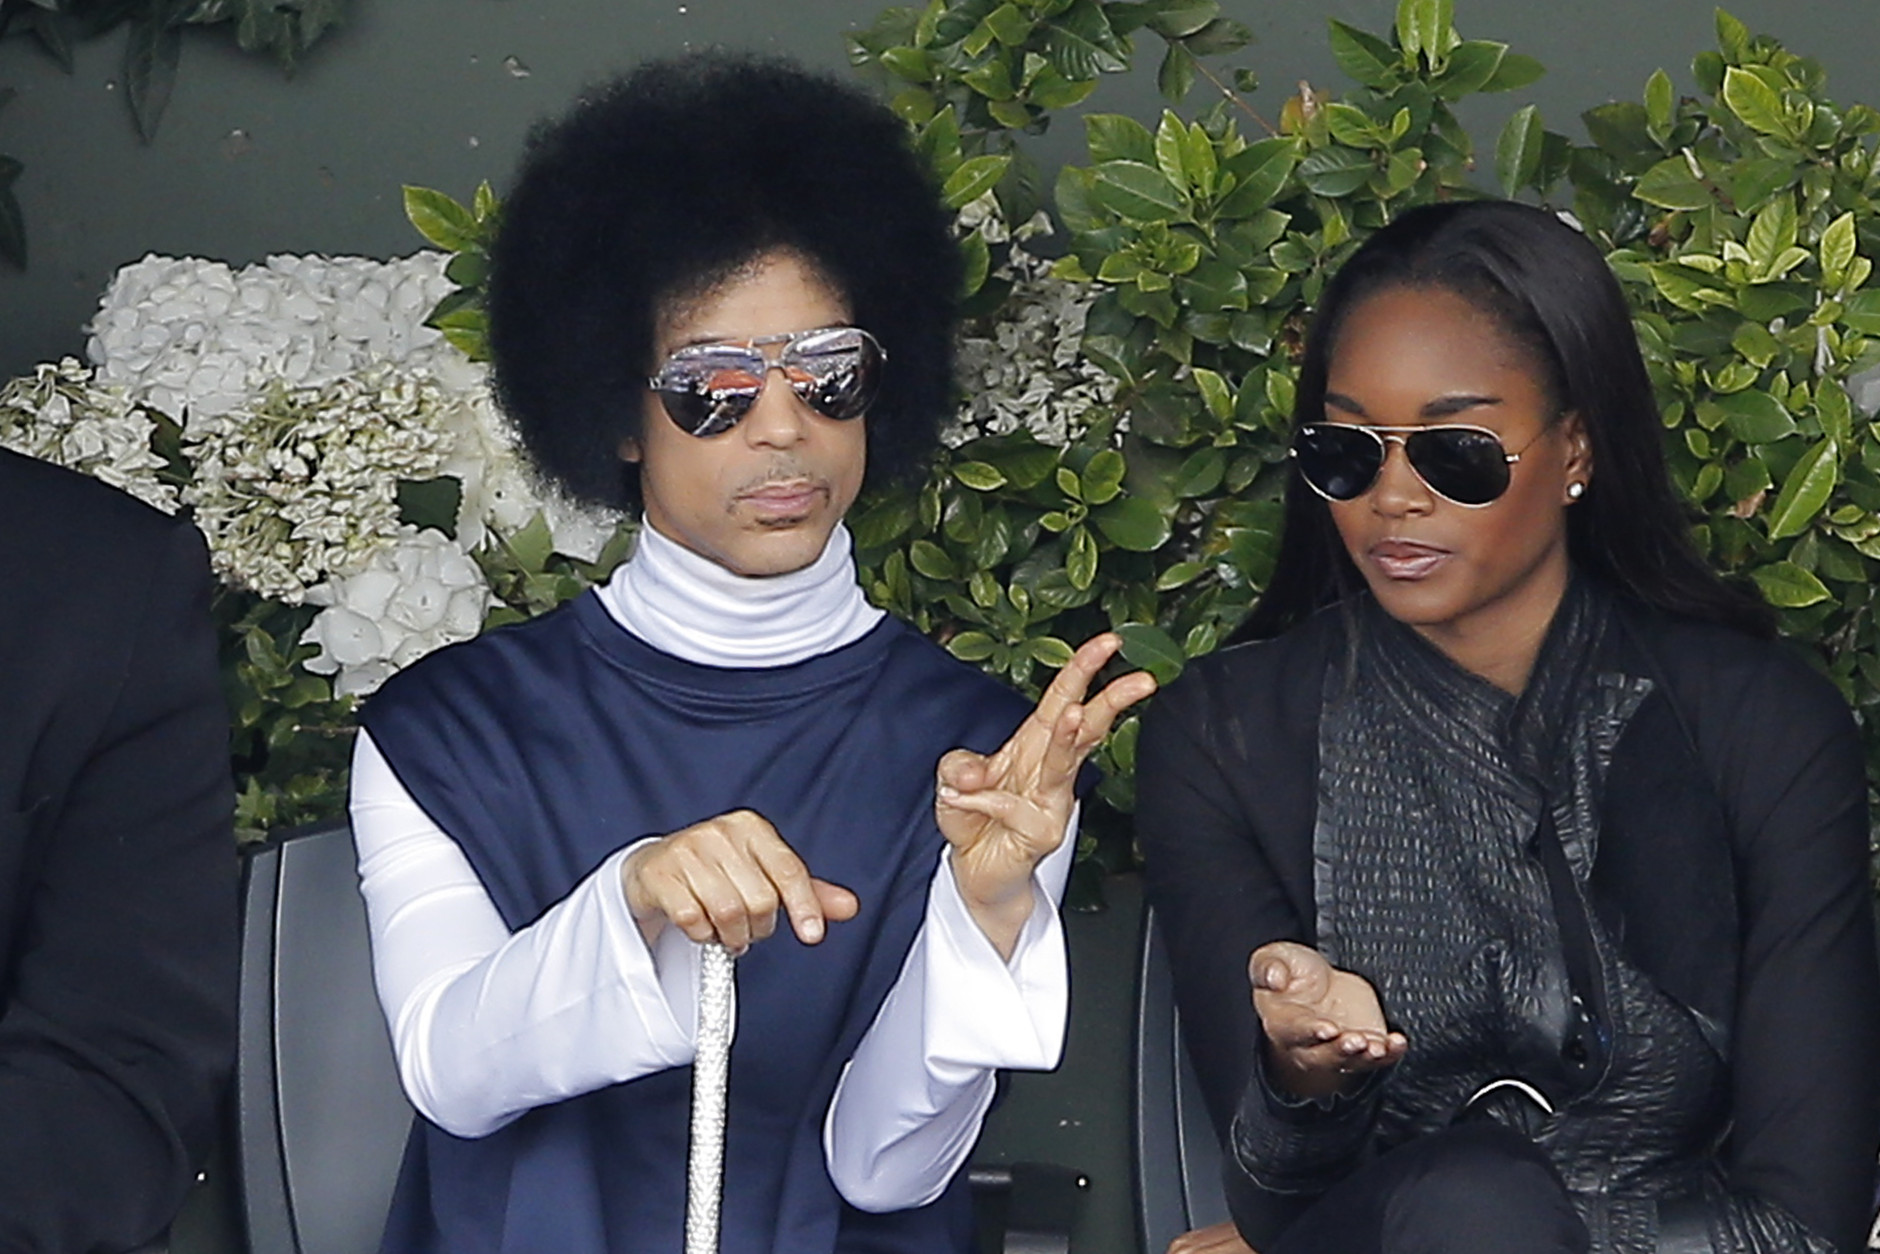 U.S. pop singer Prince, left, watches the fourth round match of the French Open tennis tournament between Spain's Rafael Nadal and Serbia's Dusan Lajovic at the Roland Garros stadium, in Paris, France, Monday, June 2, 2014. (AP Photo/Michel Spingler)